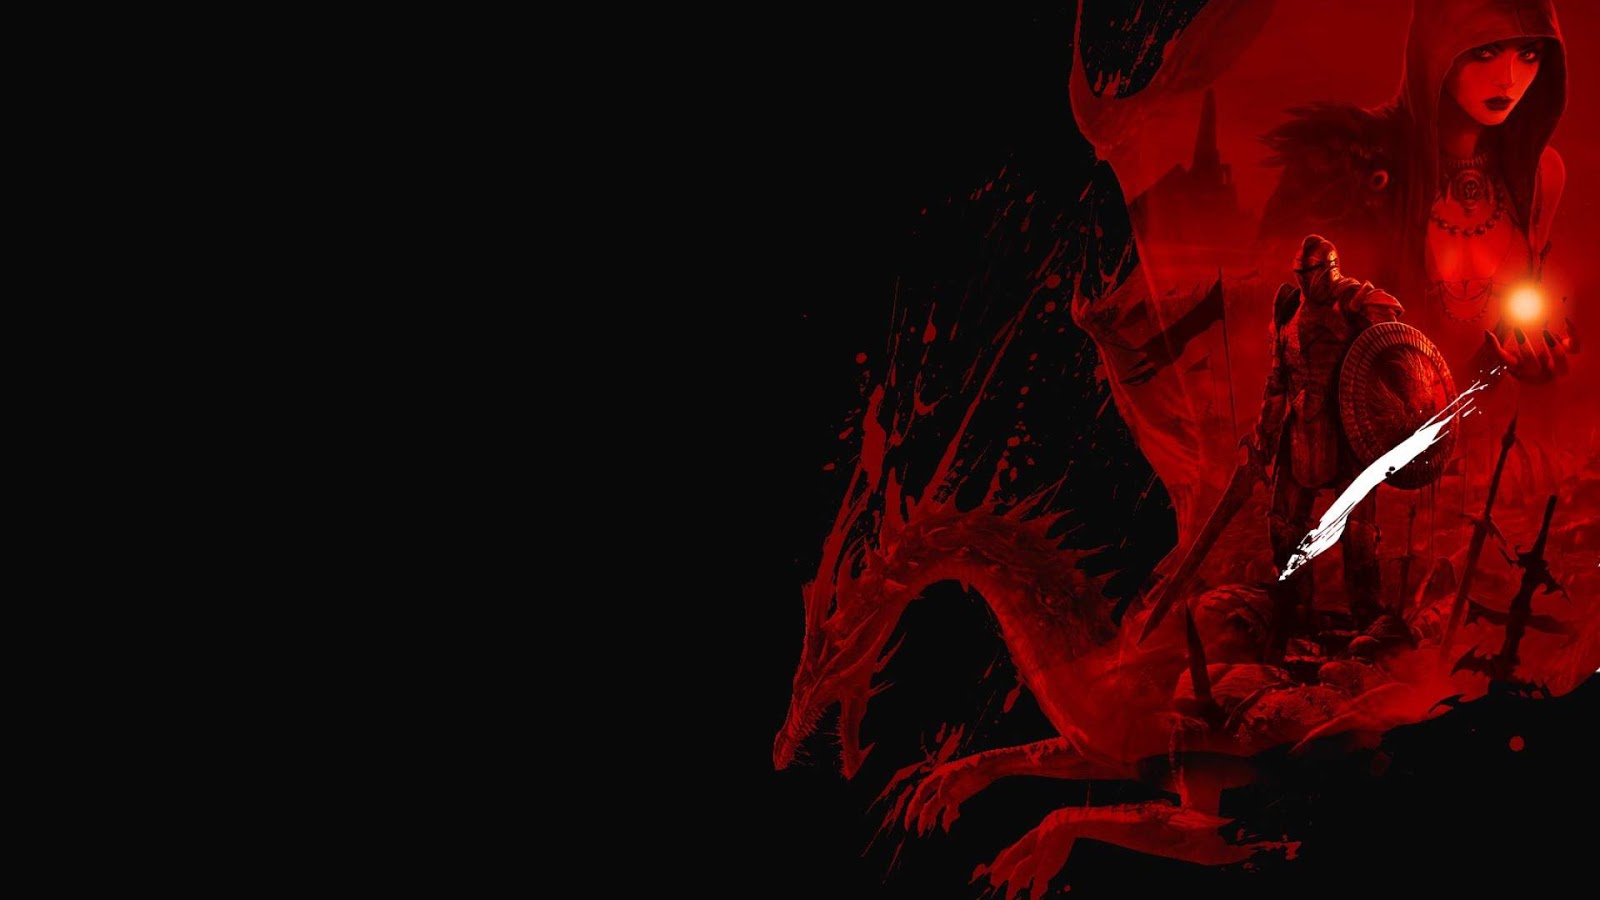  and White Wallpapers Dragon Age Blood Red Dragon Black Red Wallpaper